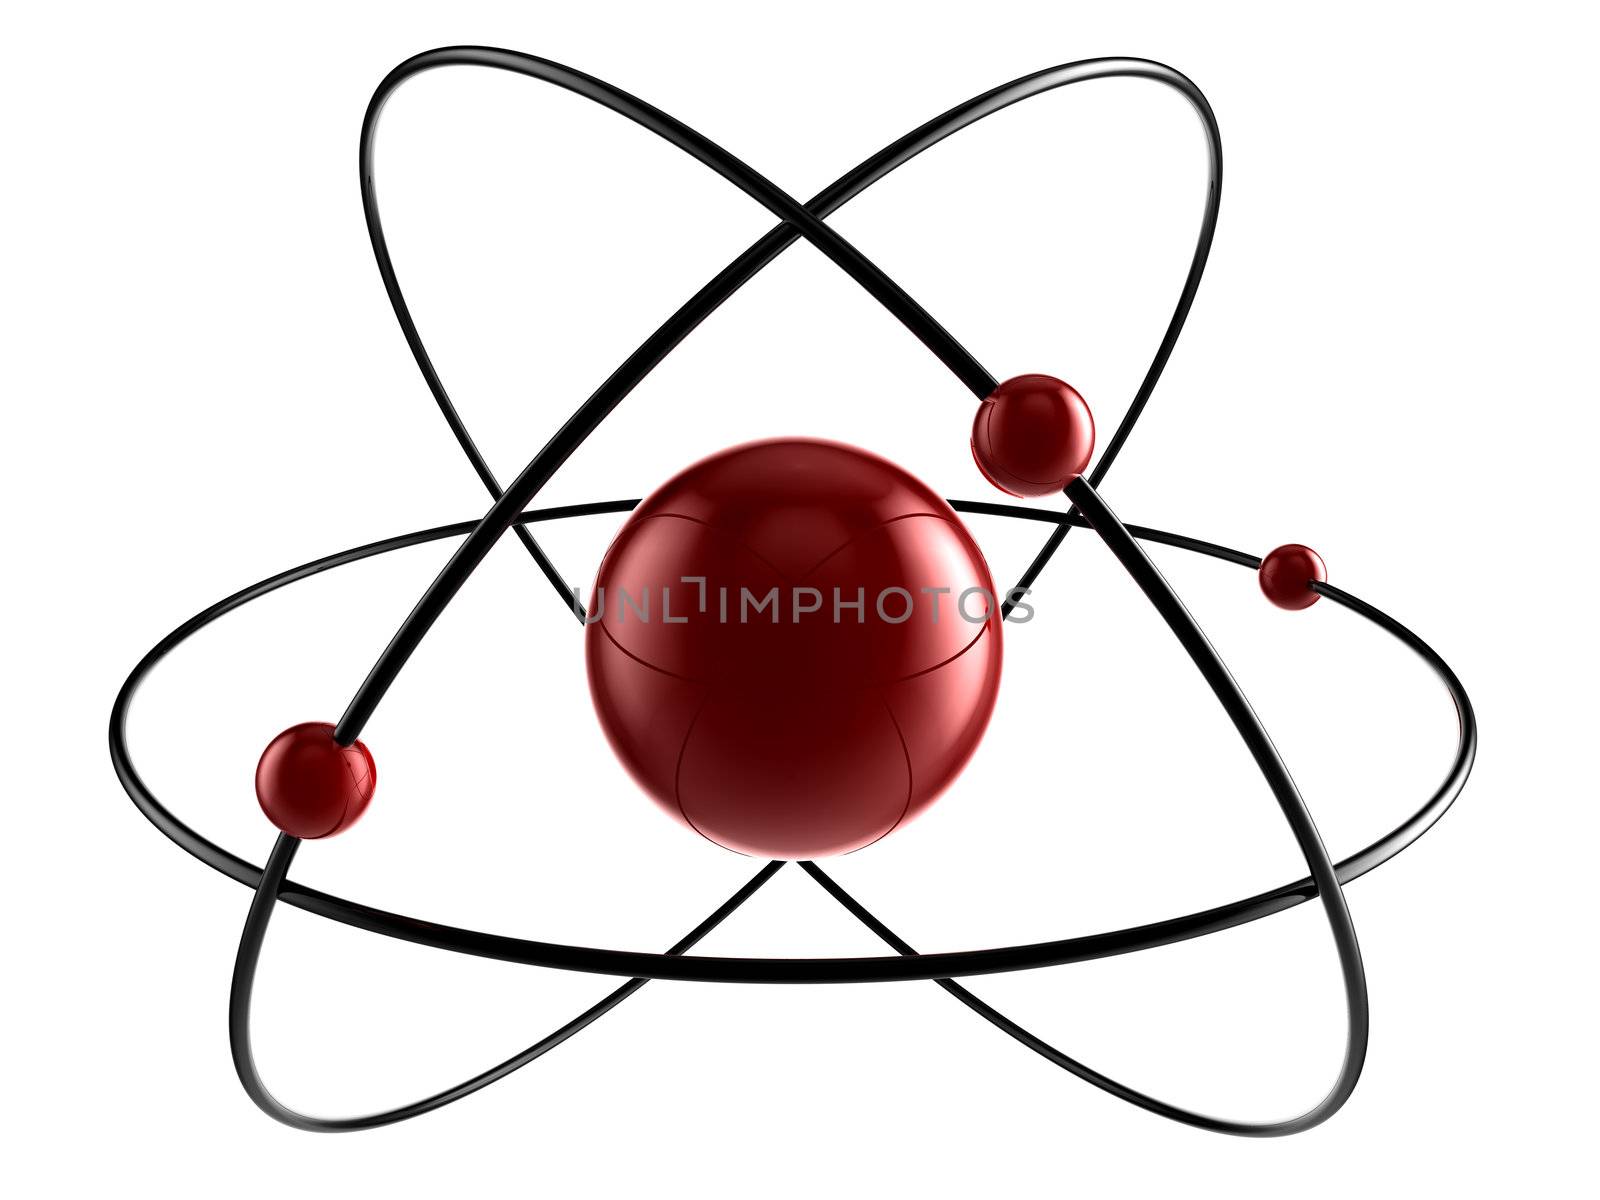 A nucleus with 3 orbital rings and electrons around the core